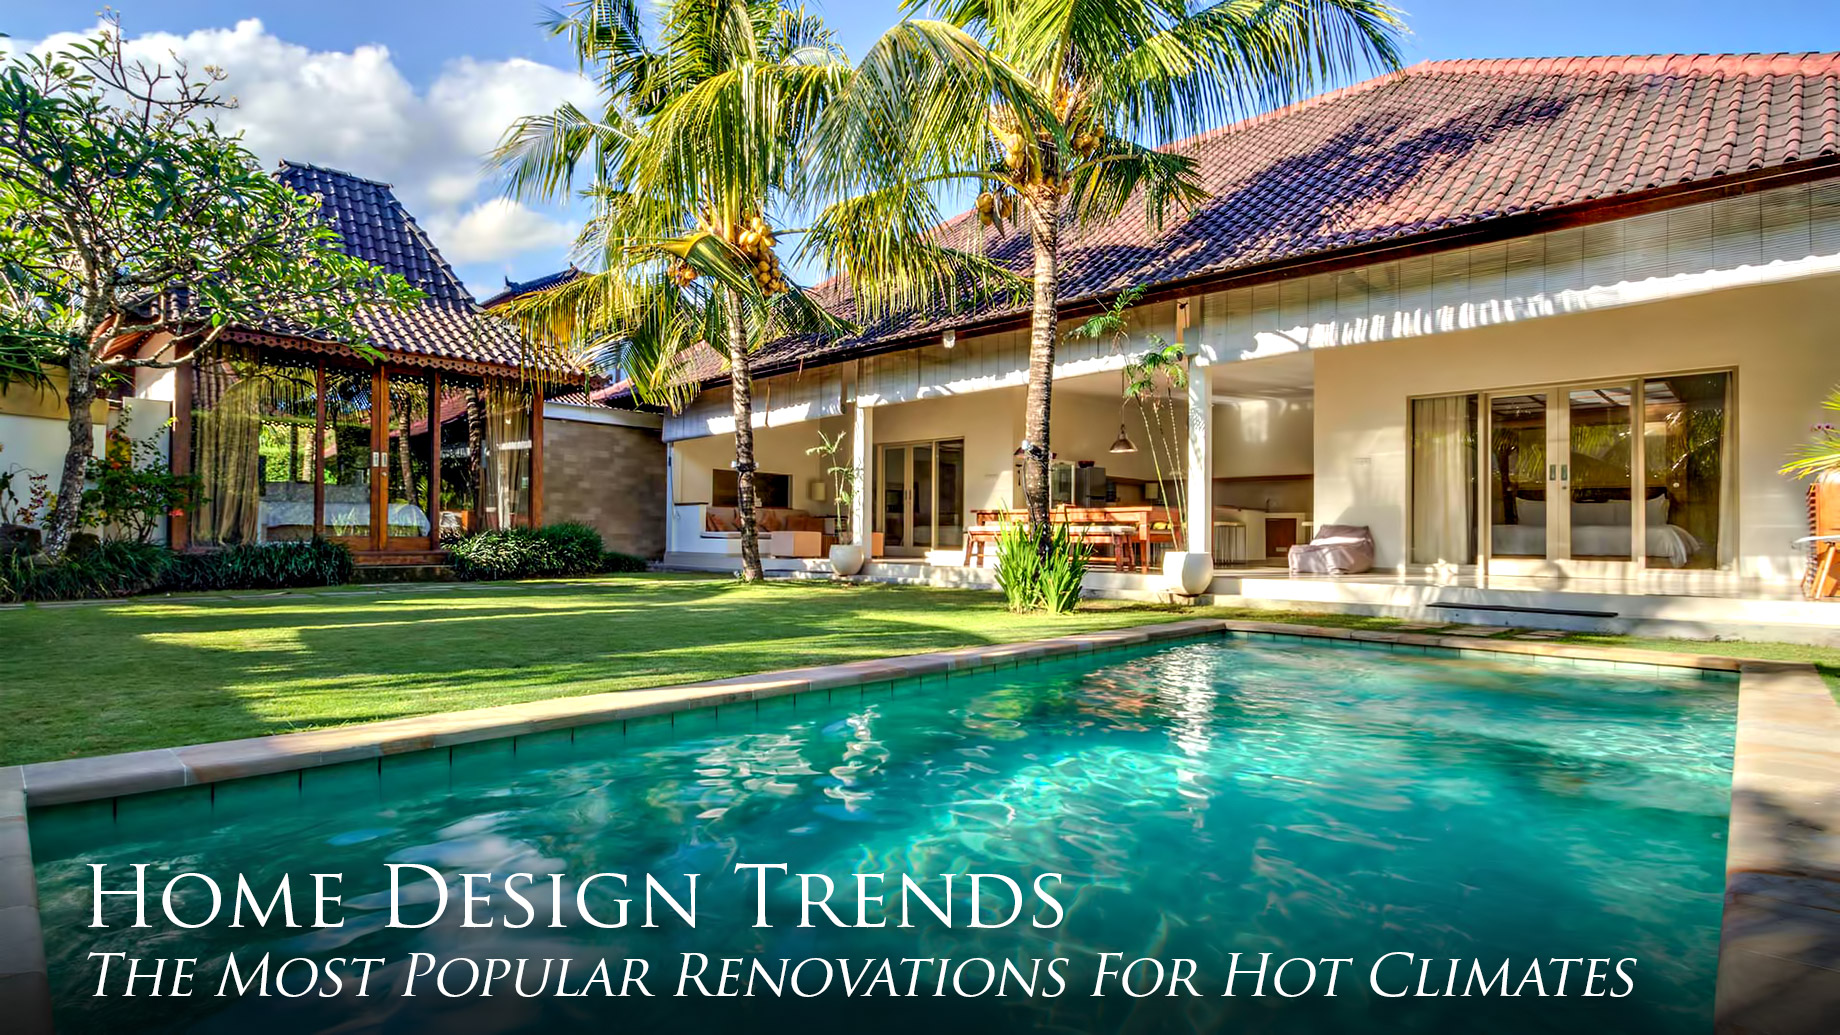 Home Design Trends - The Most Popular Renovations For Hot Climates